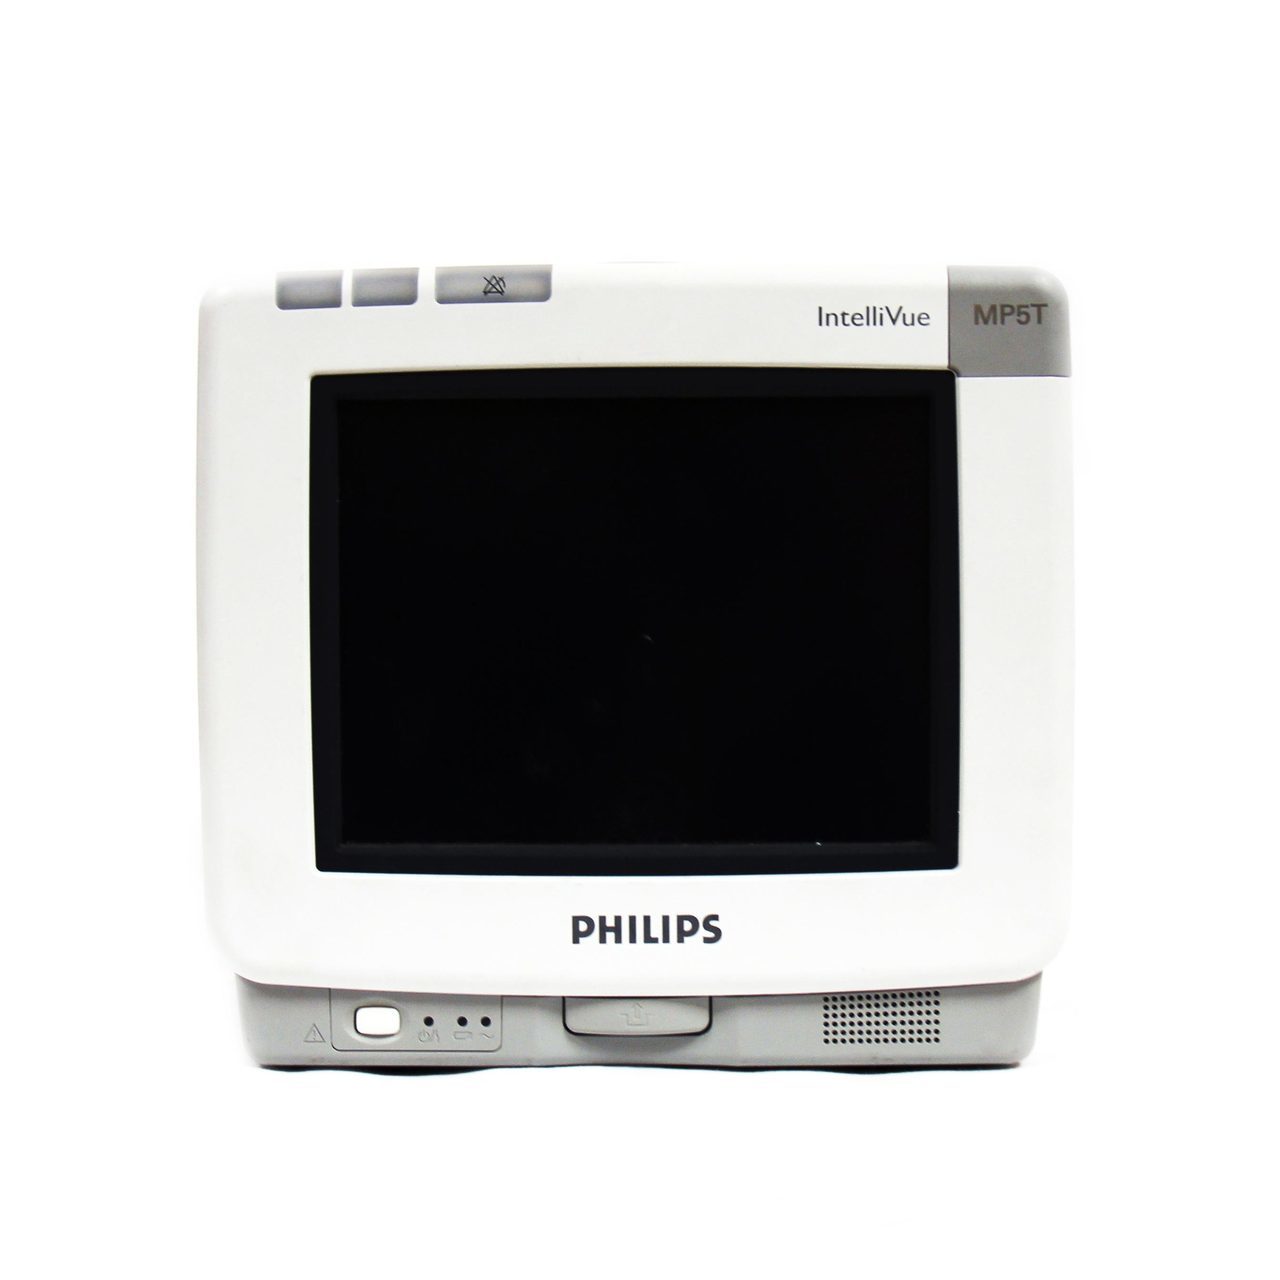 Philips IntelliVue MP5T Bedside Monitor